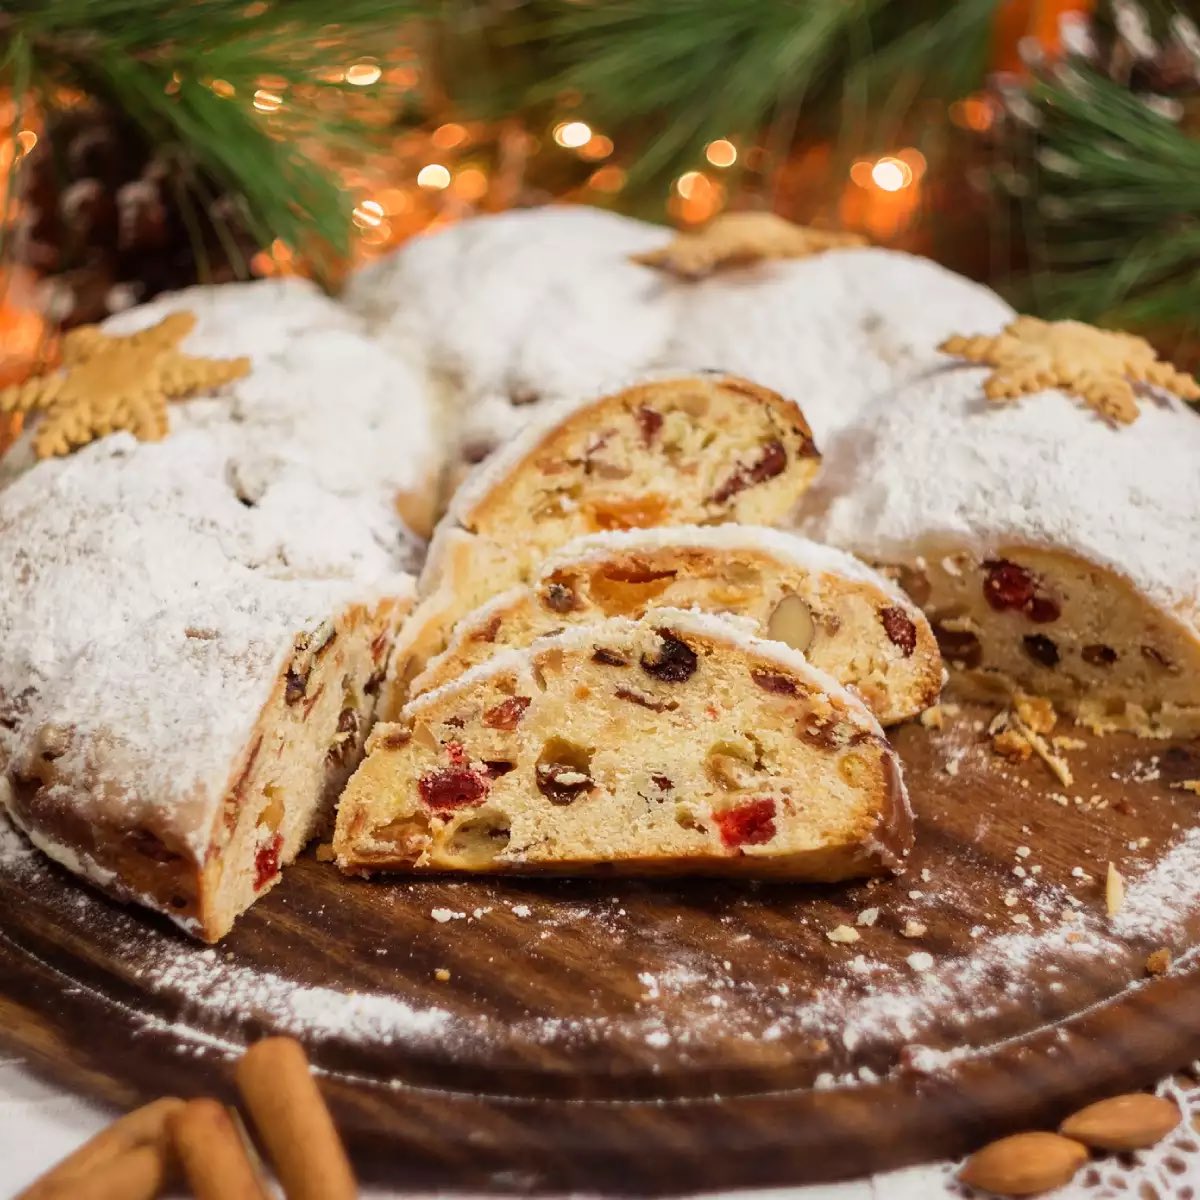 So apparently stollen is trending. Outstanding! This is too delicious a baked good to be enjoyed only at Christmastime.